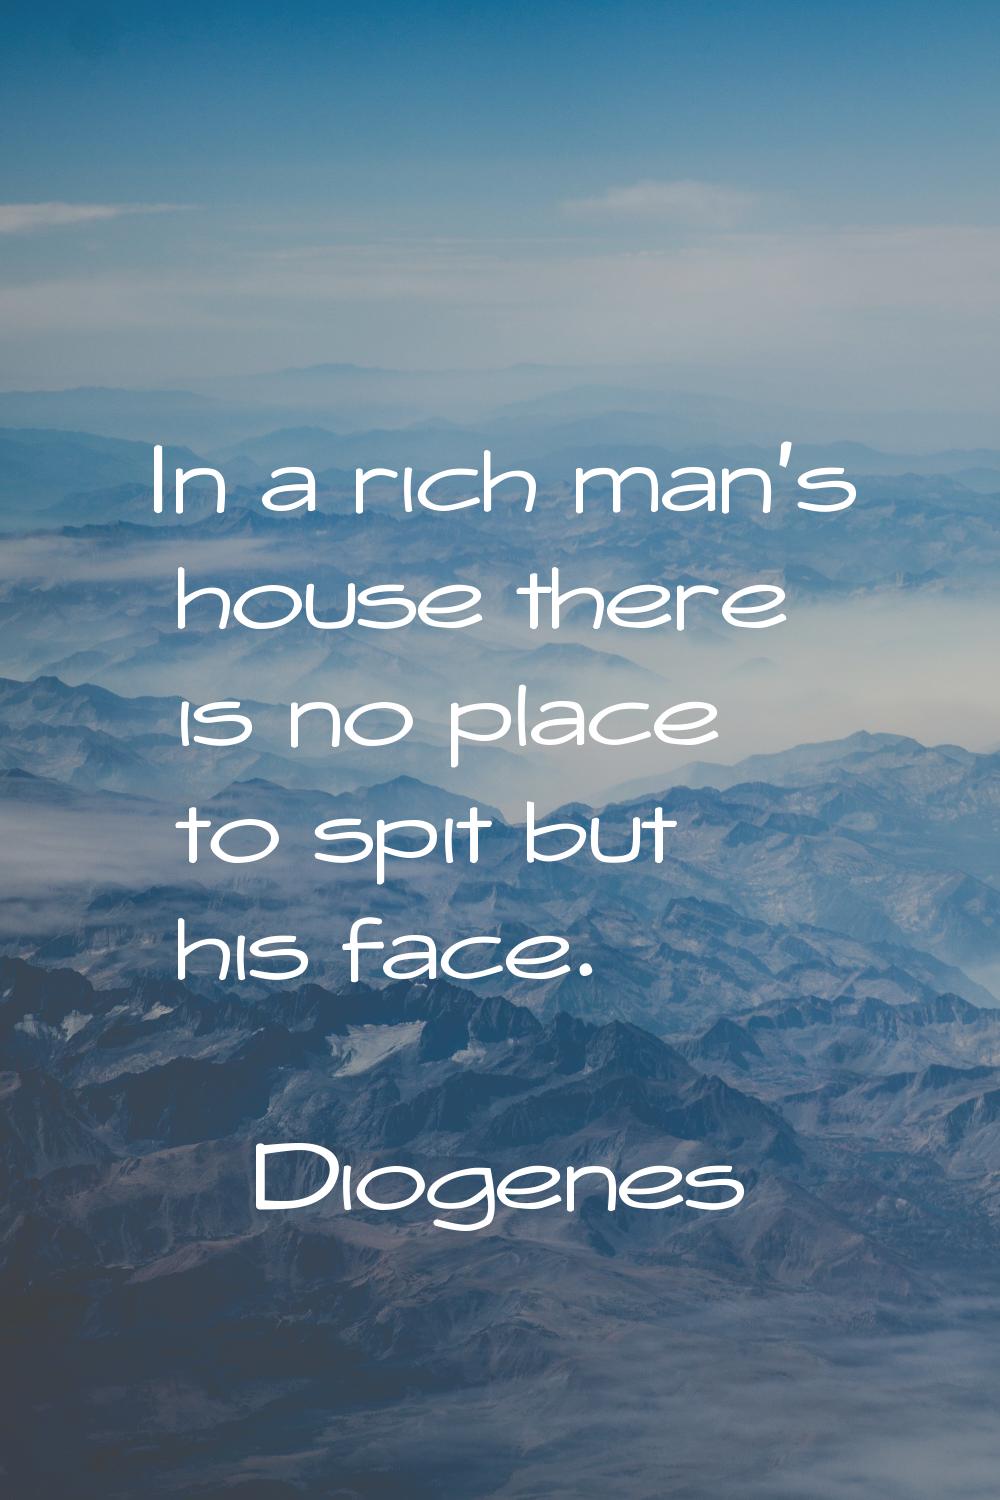 In a rich man's house there is no place to spit but his face.